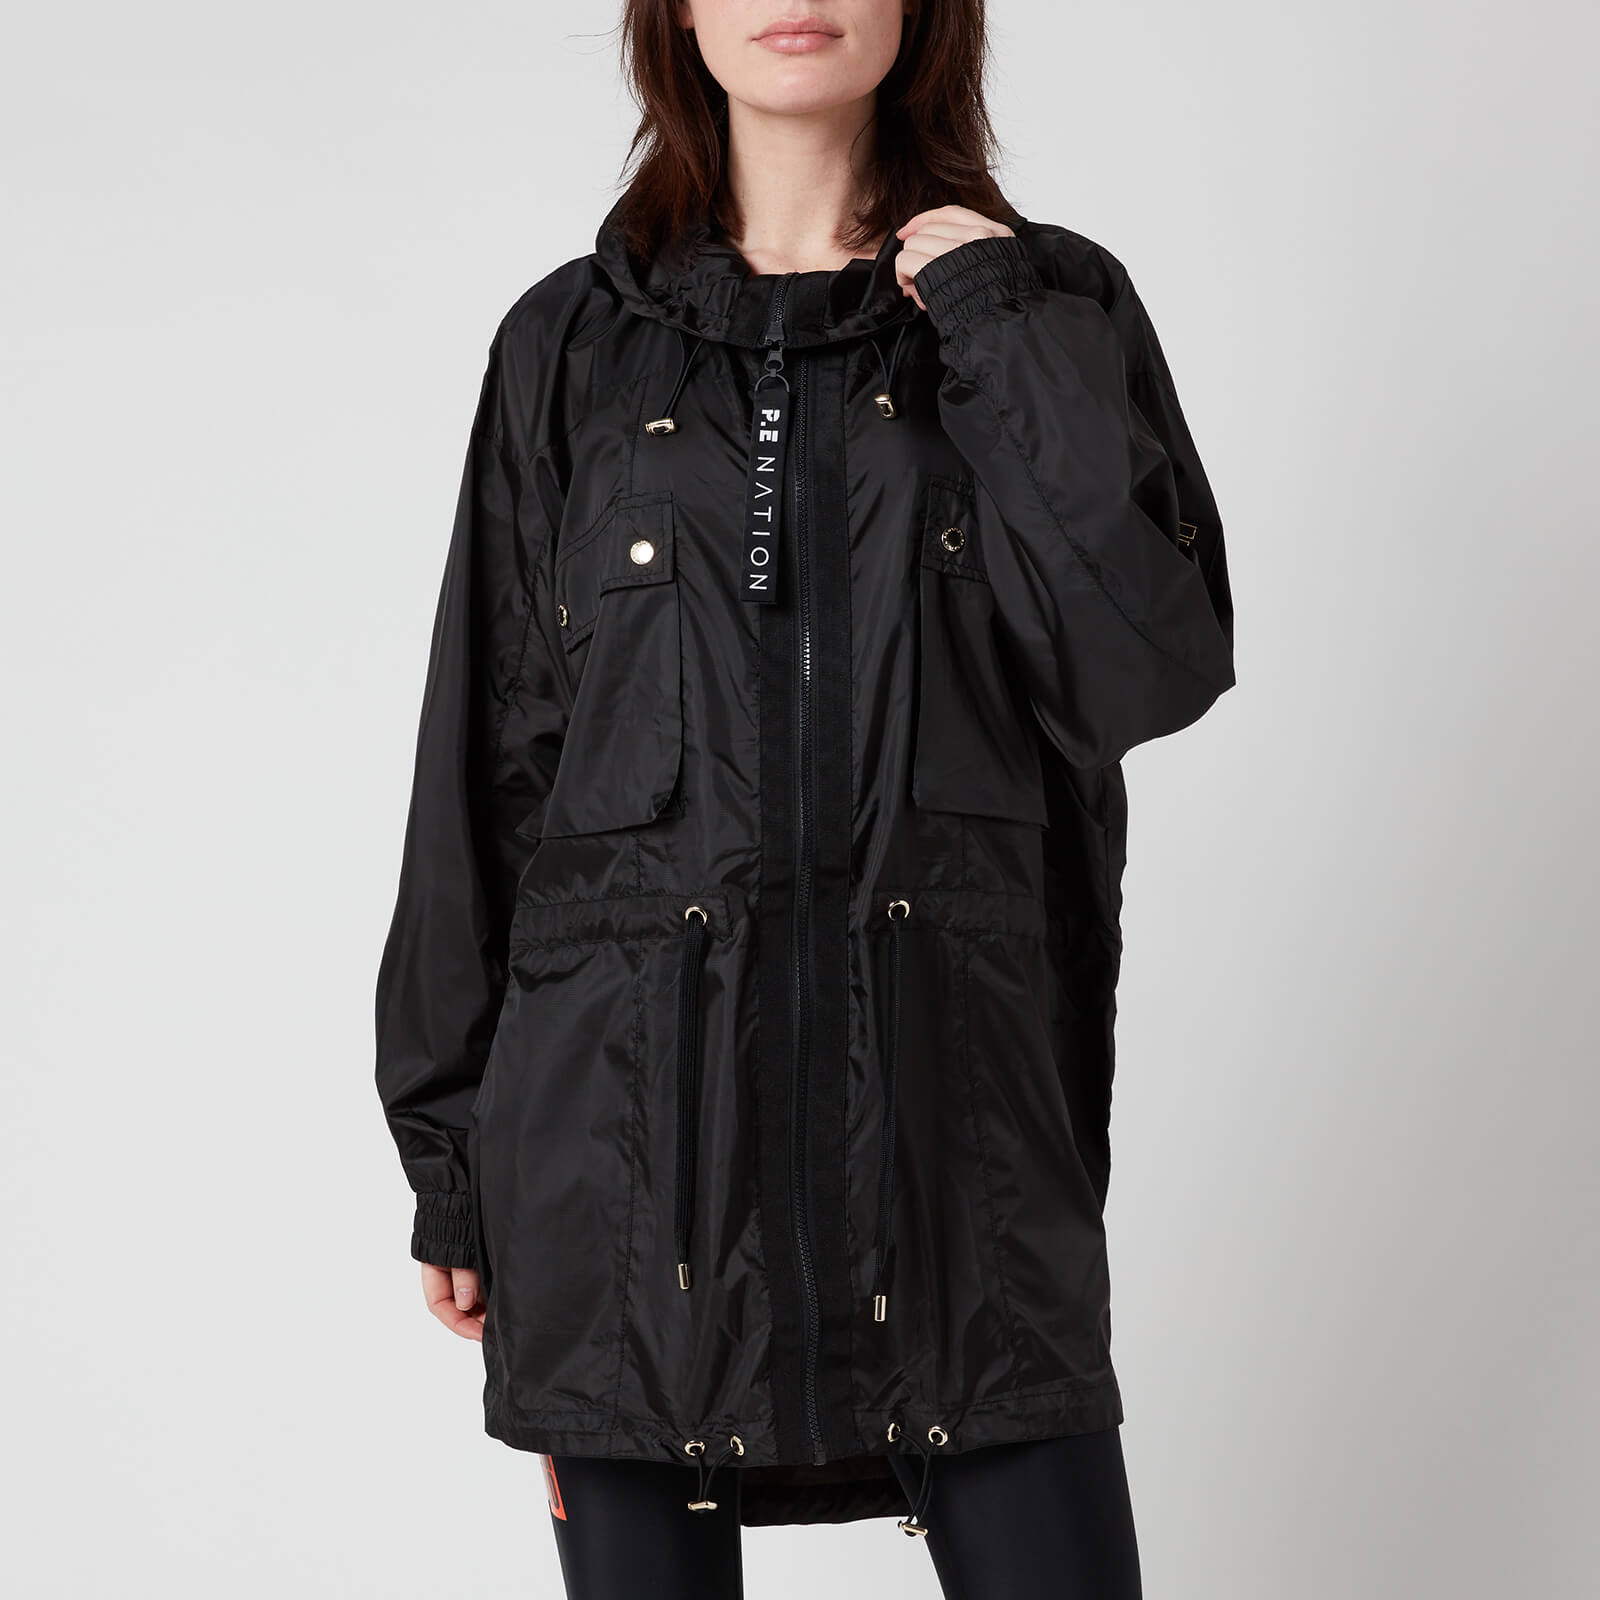 P.E Nation Women's In Bounds Jacket - Black - S